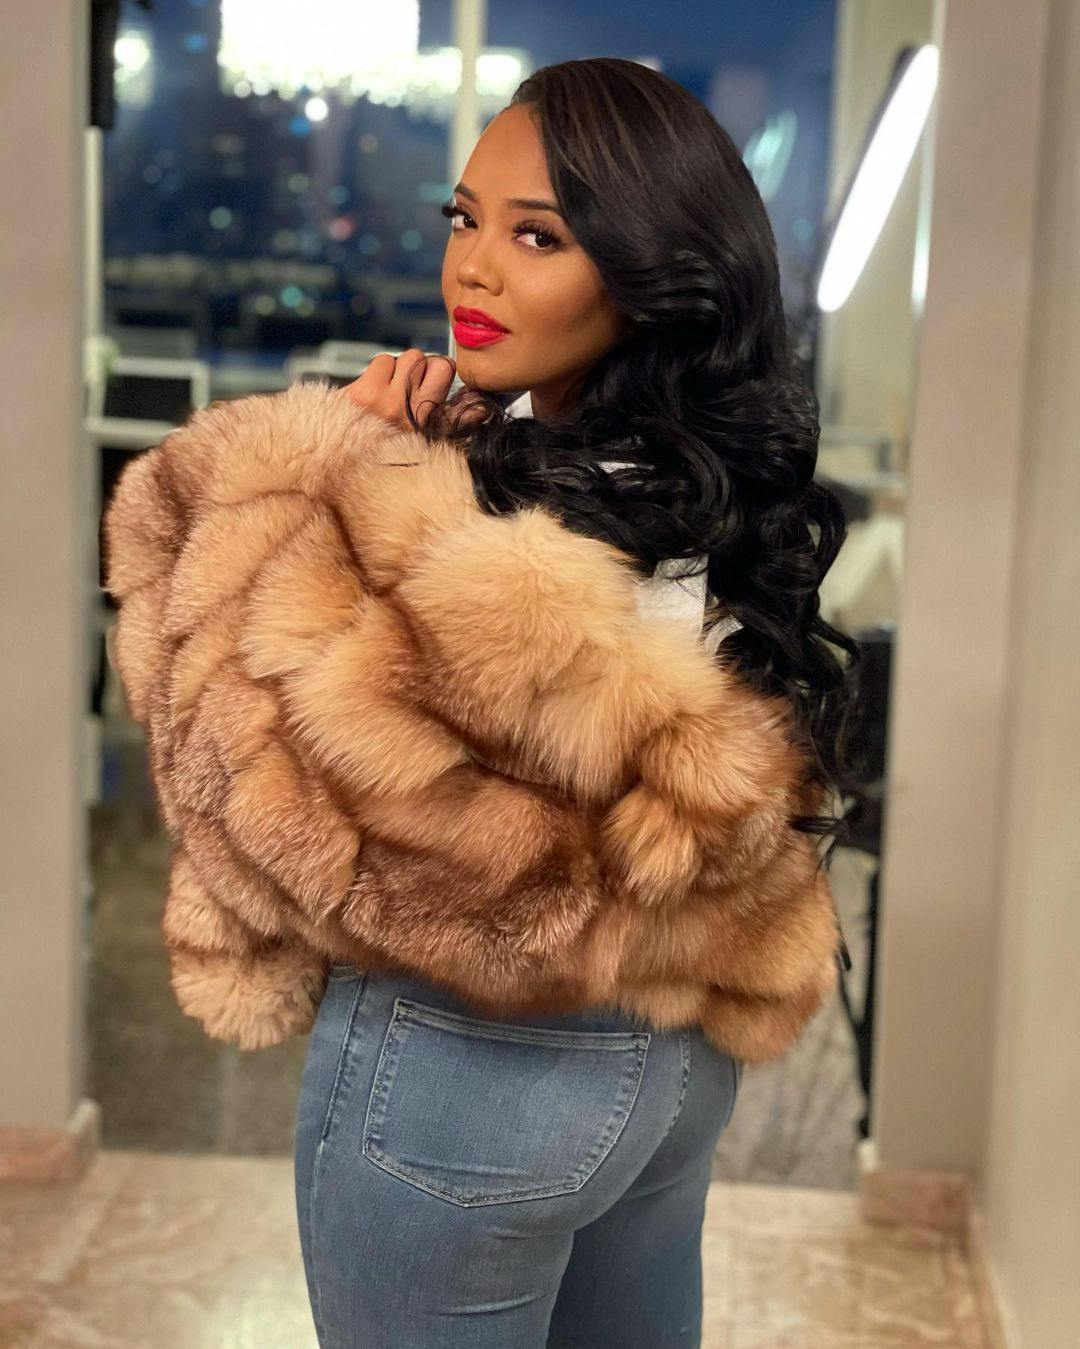 Angela Simmons' in blue jeans.